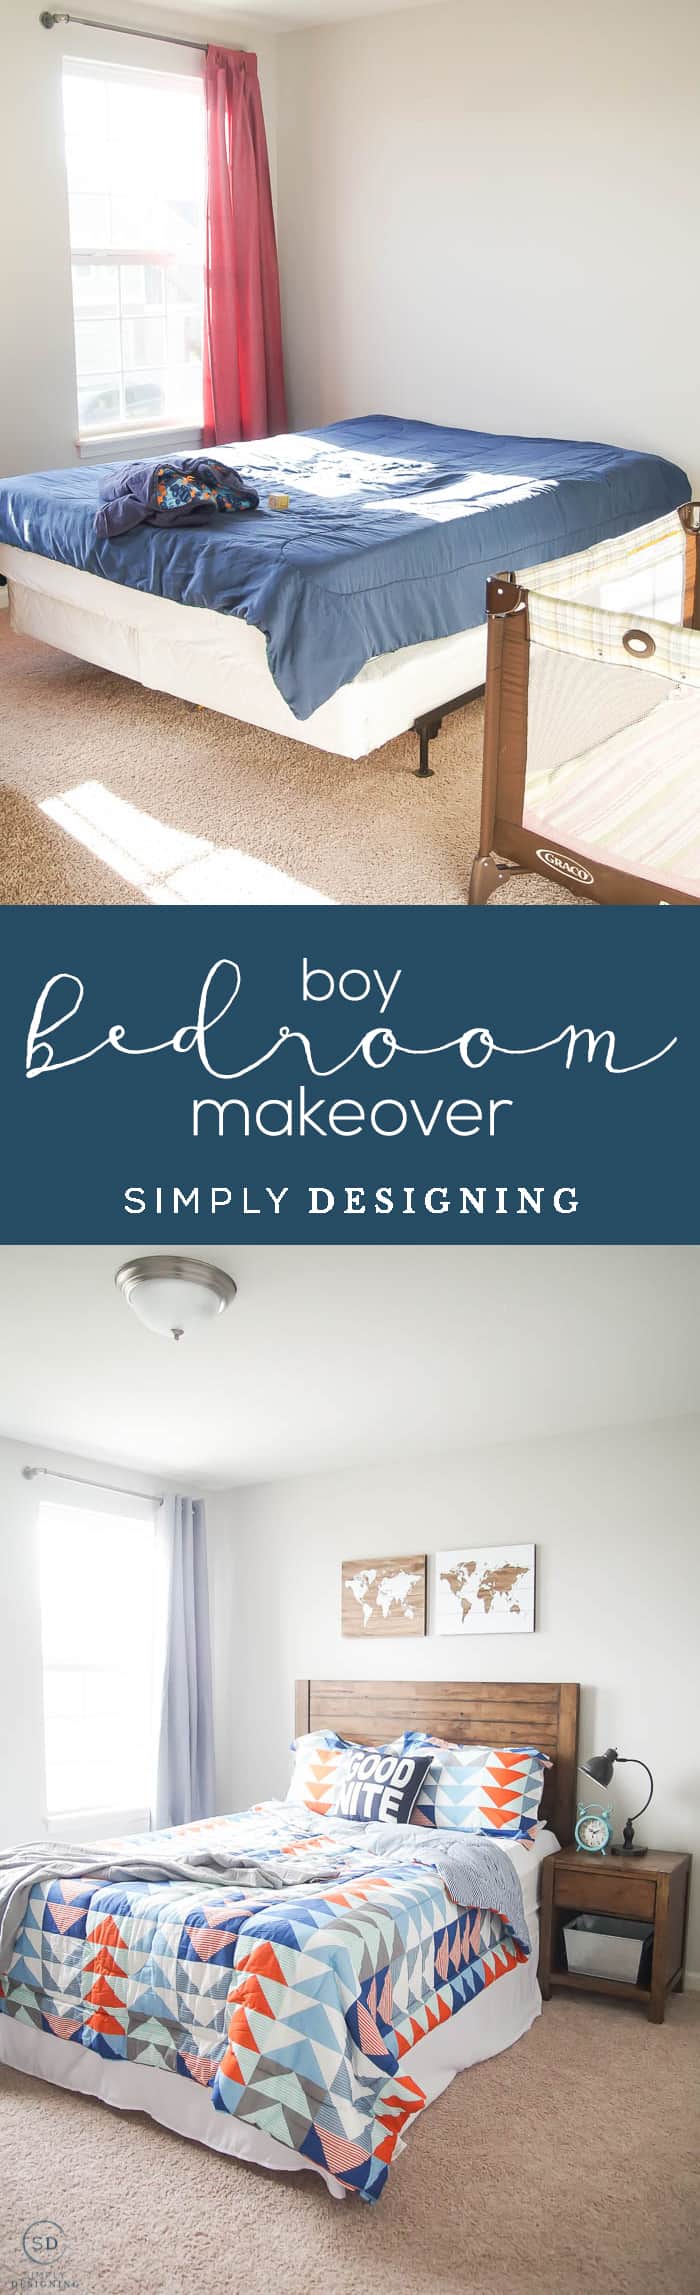 Before & After : Cool Boy Bedroom Idea - Boy Bedroom Makeover - boy bedroom idea on a budget - awesome boy bedroom idea - #ad #BHGLiveBetter #BHGatWalmart @BHGLiveBetter @walmart